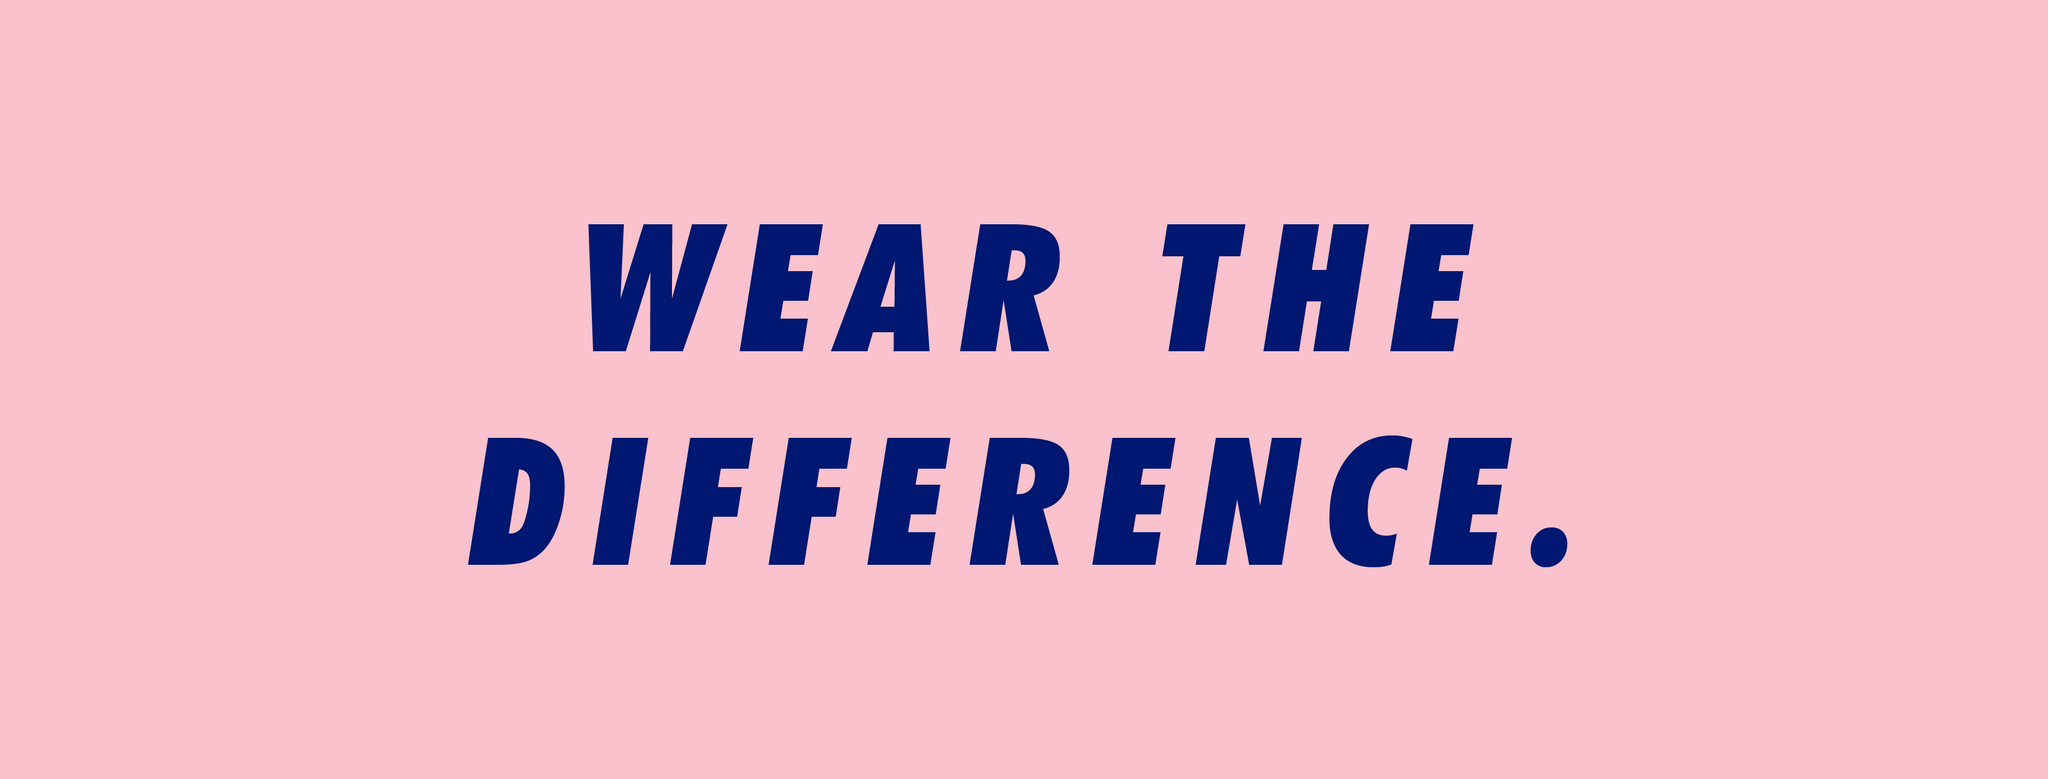 Wear The Difference tagline FB cover